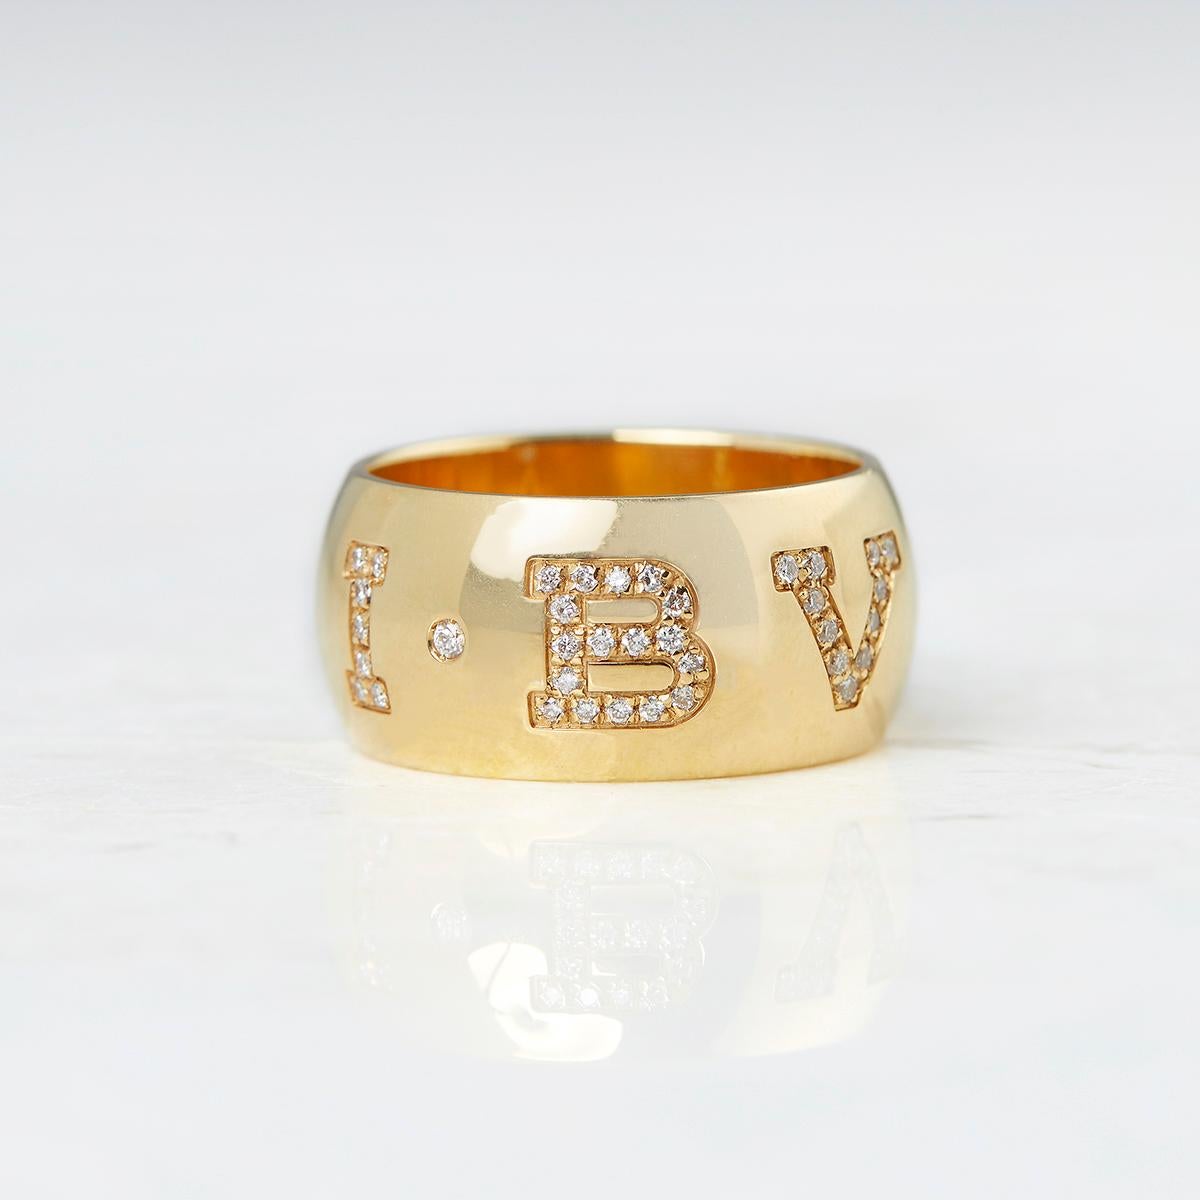 Xupes Code: J118
Brand: Bulgari
Description: 18k Yellow Gold 0.50ct Diamond Monlogo Ring
Accompanied With: Box Only
Gender: Ladies
UK Ring Size: N 1/2
EU Ring Size: 55
US Ring Size: 7
Resizing Possible?: NO
Band Width: 1cm
Condition: 9
Material: